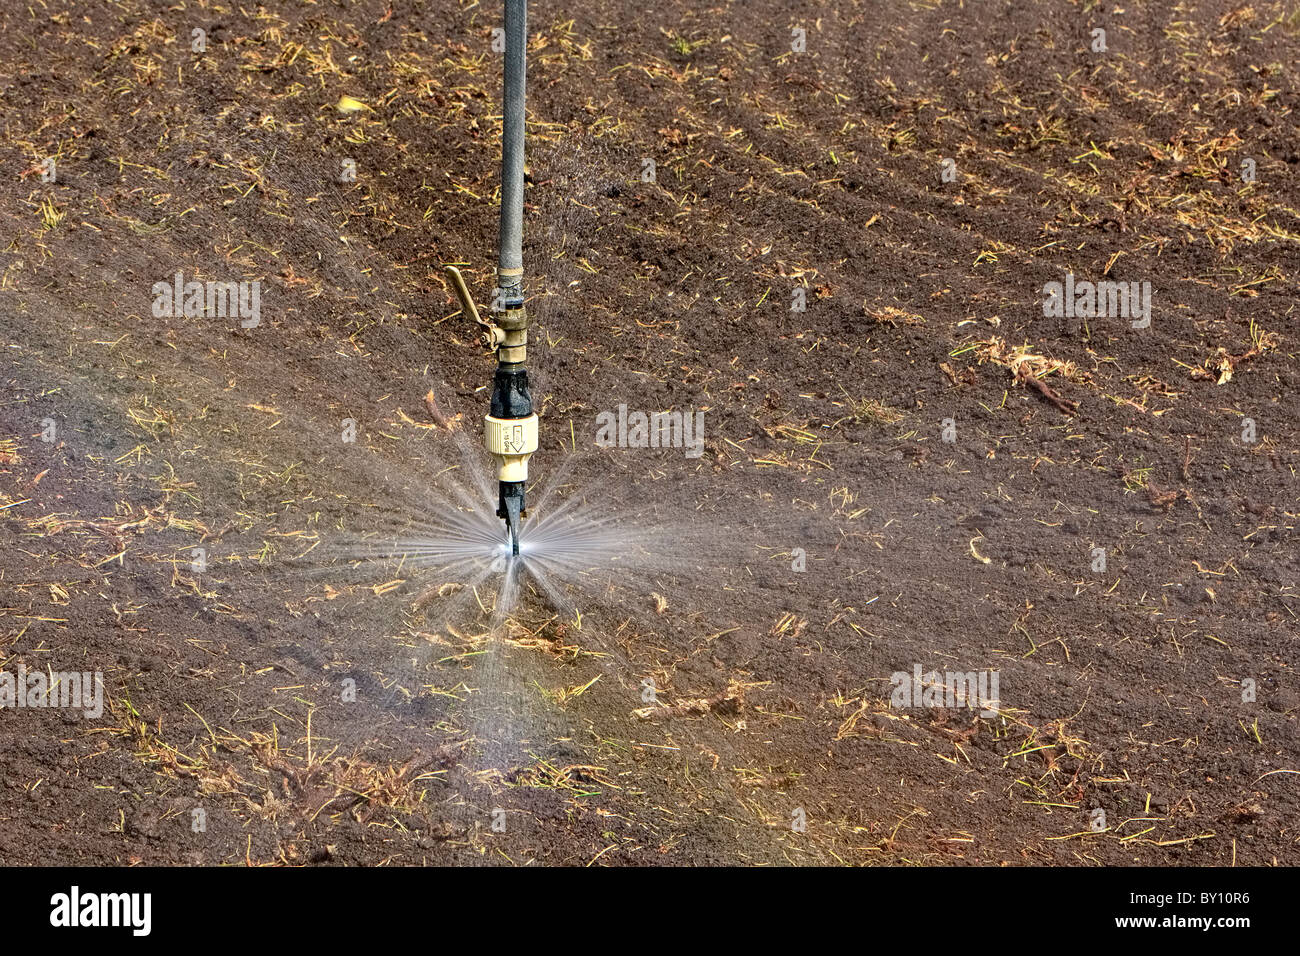 Agriculture watering/sprinklers Stock Photo